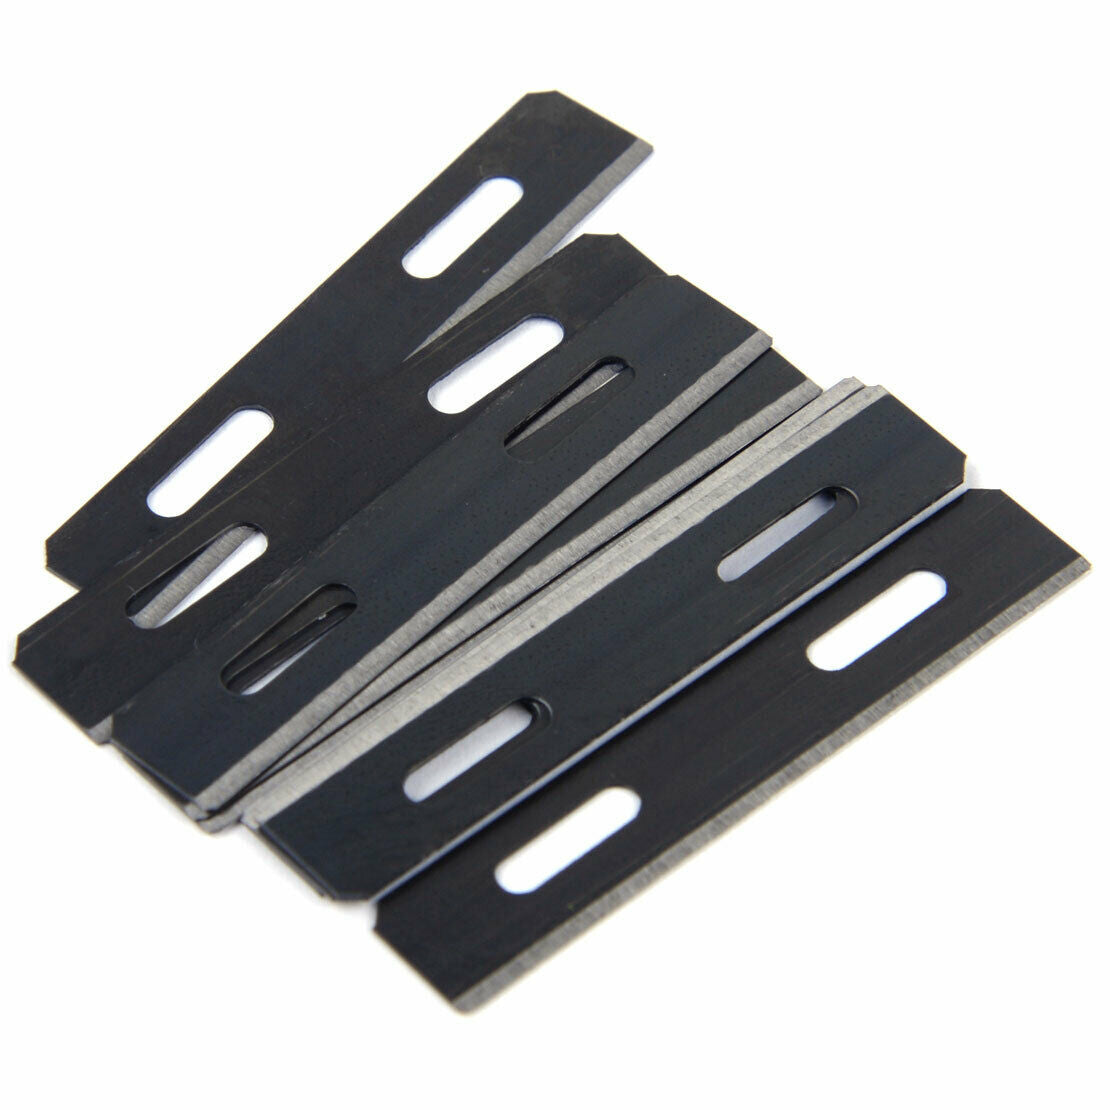 10x Stainless Steel Blades Fit for Leather Craft Edge Skiver Thinning Tool AT